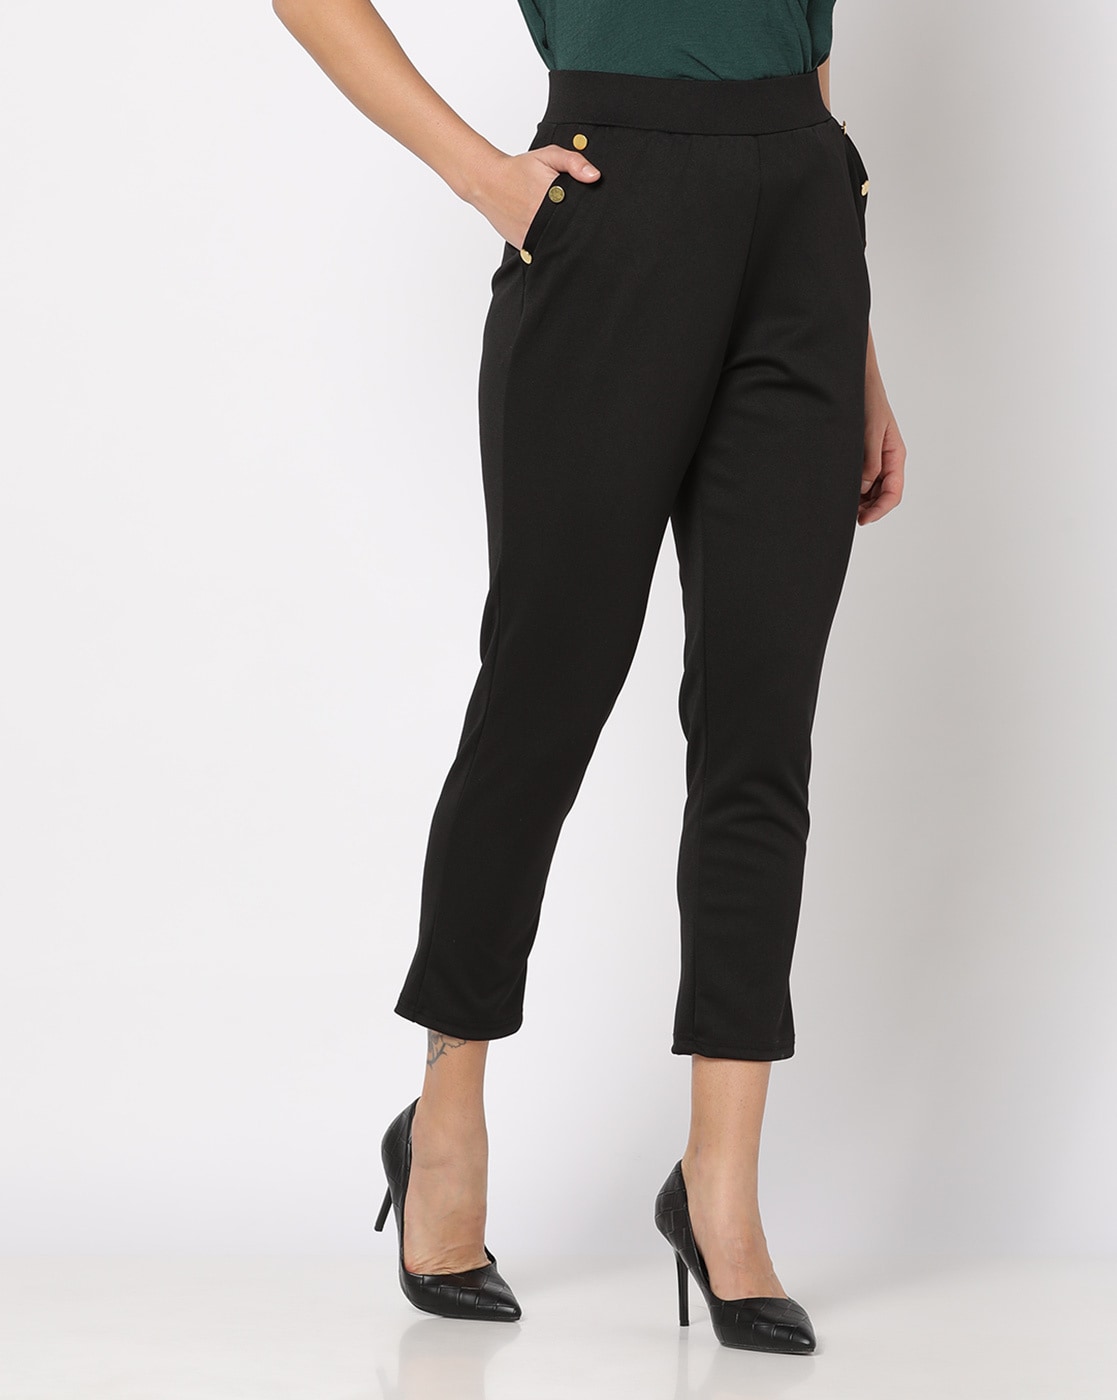 Buy Black Pants For Women Online In India At Best Price Offers | Tata CLiQ